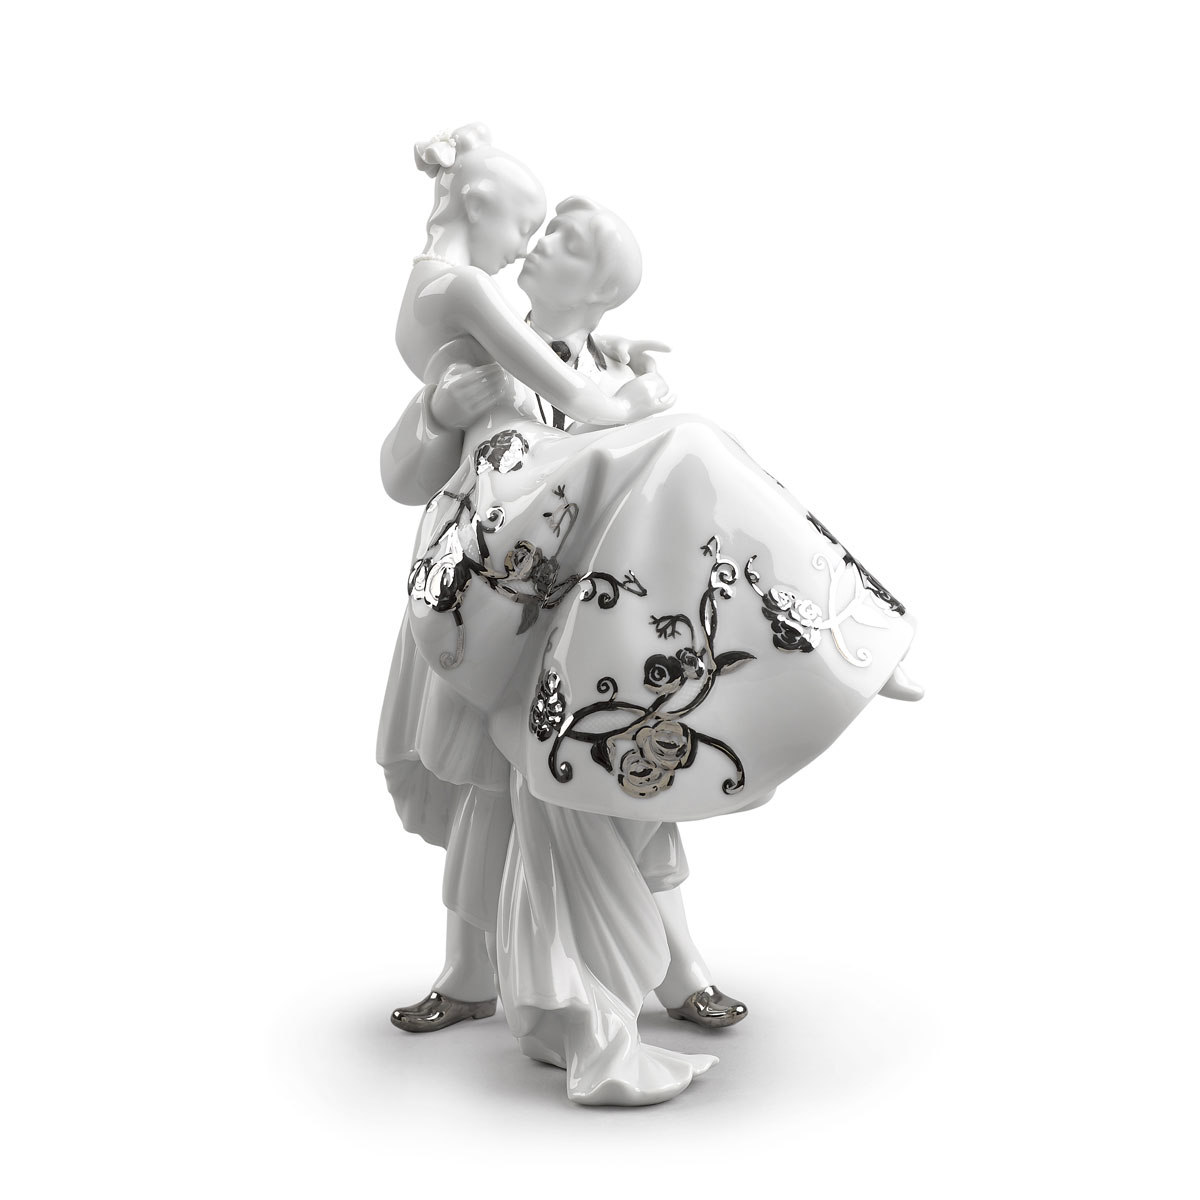 Lladro Classic Sculpture, The Happiest Day Couple. Figurine. Silver Luster